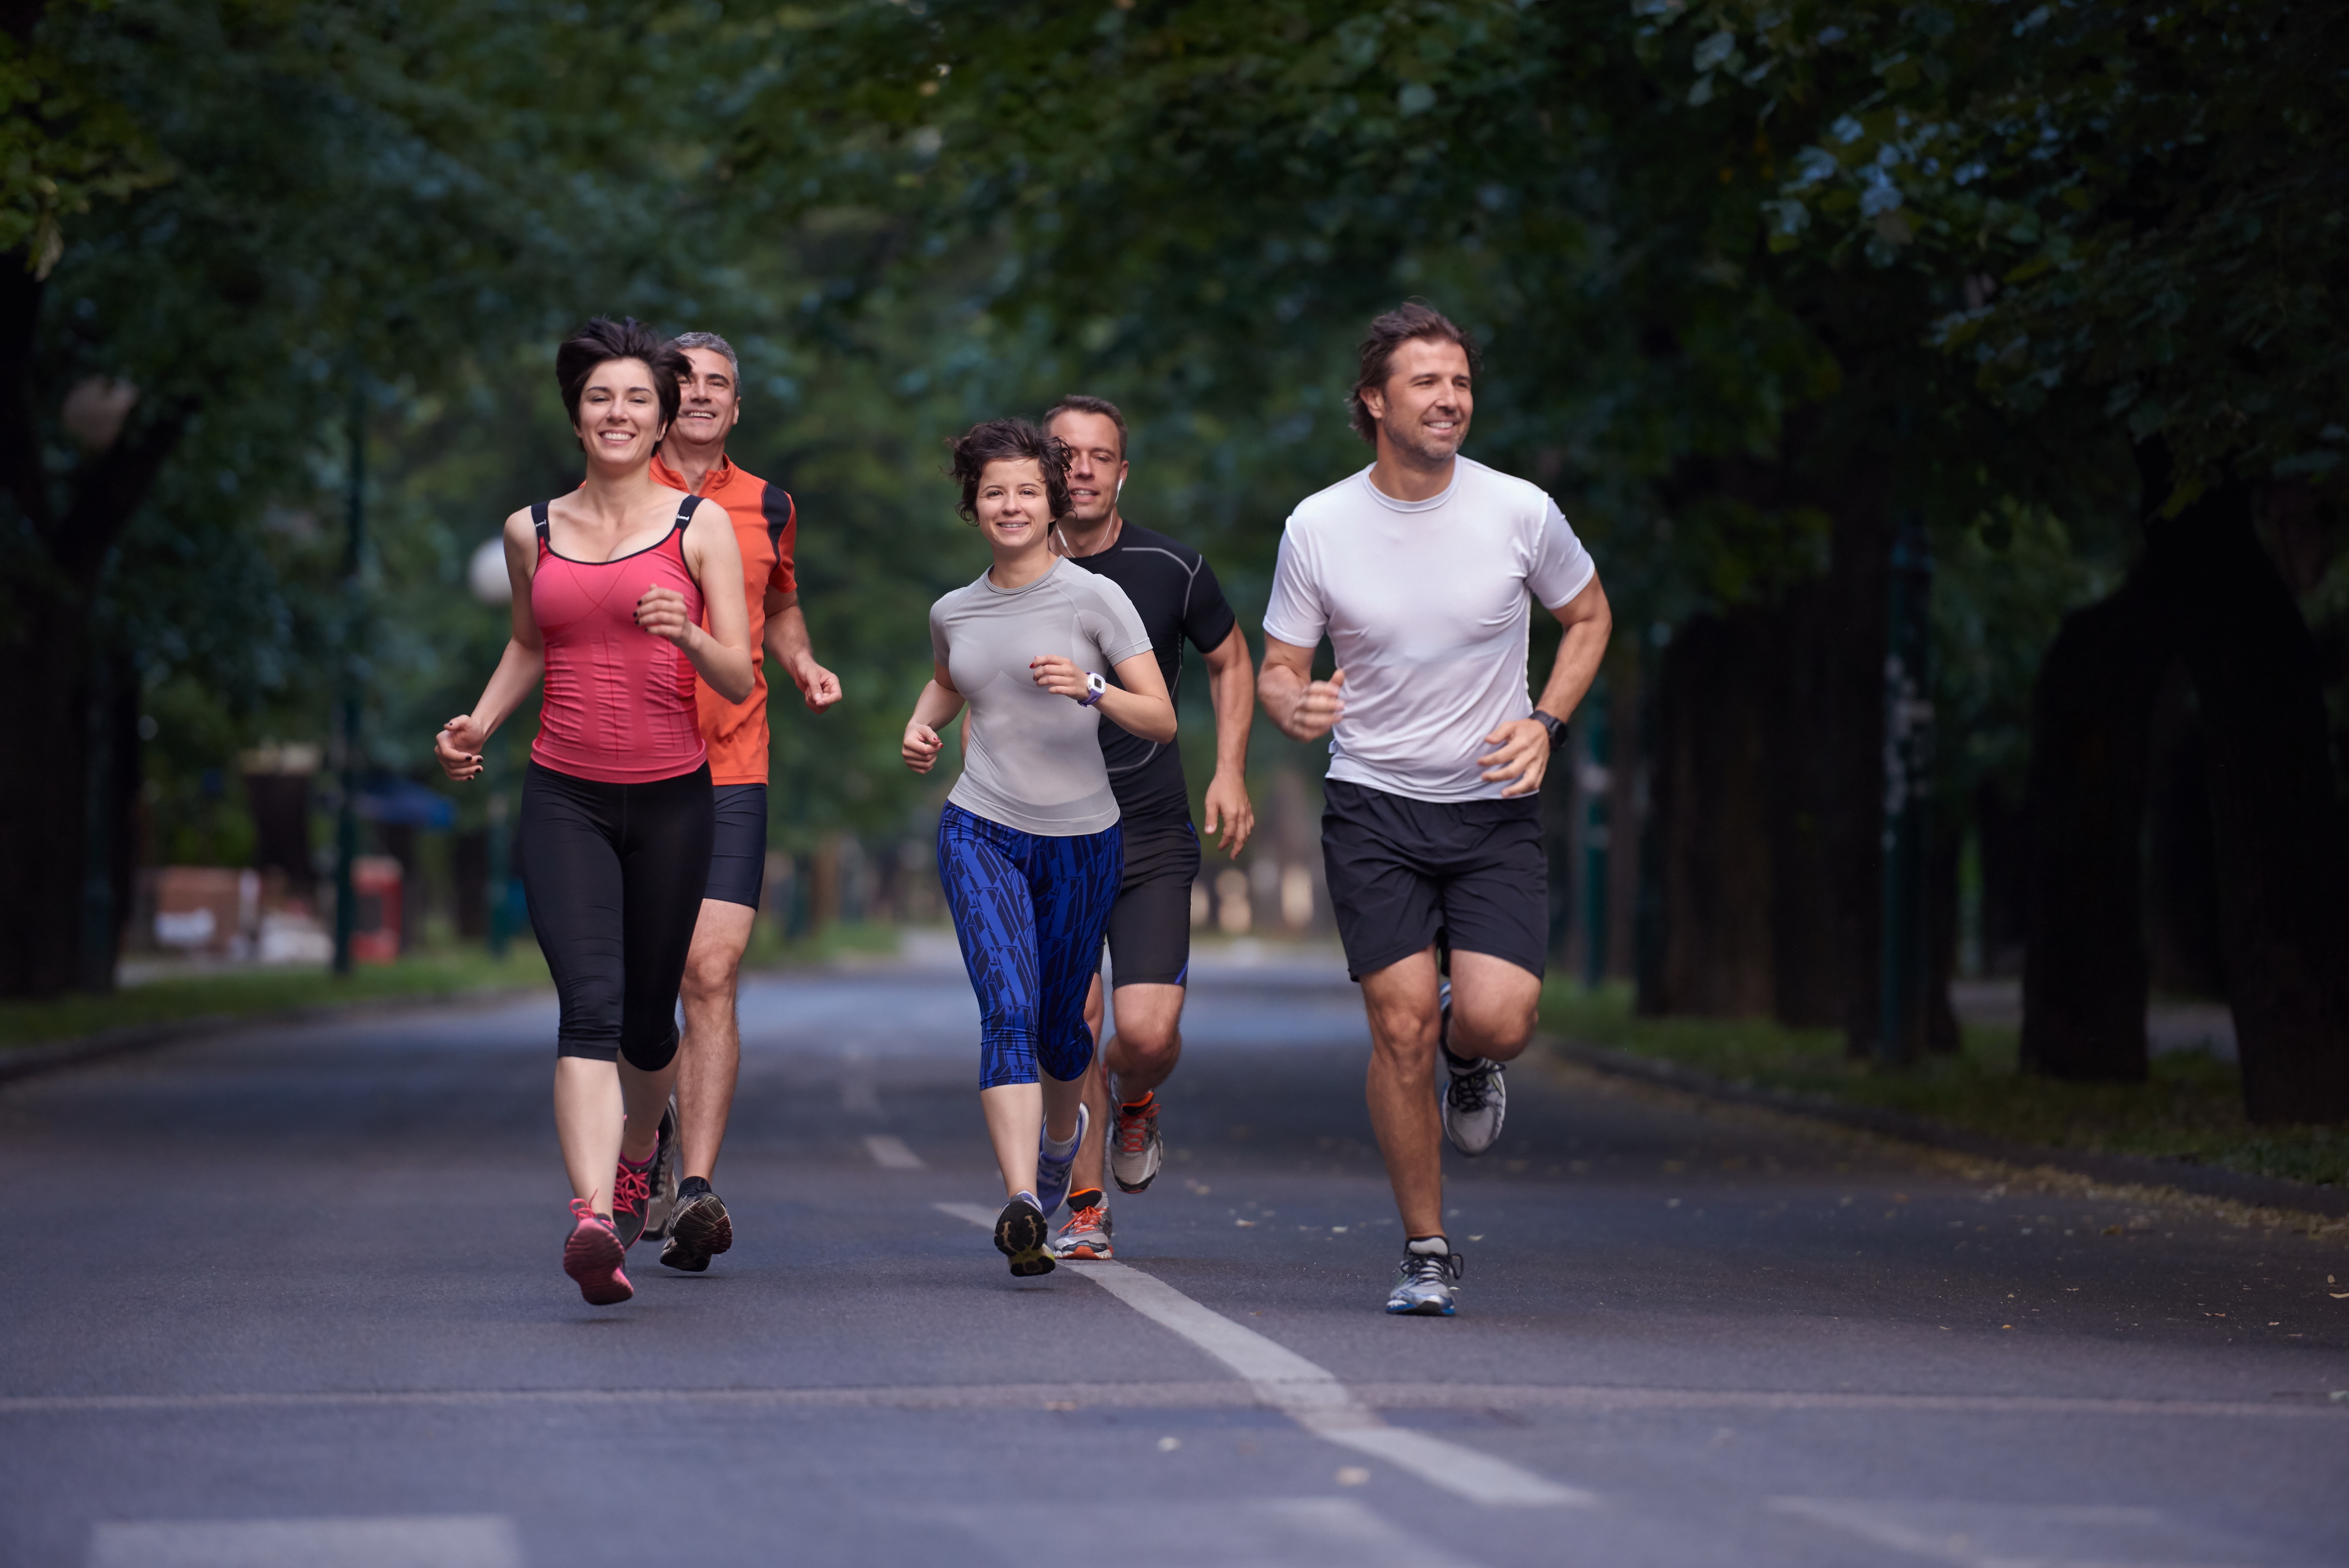 How can you get back into running after an injury?